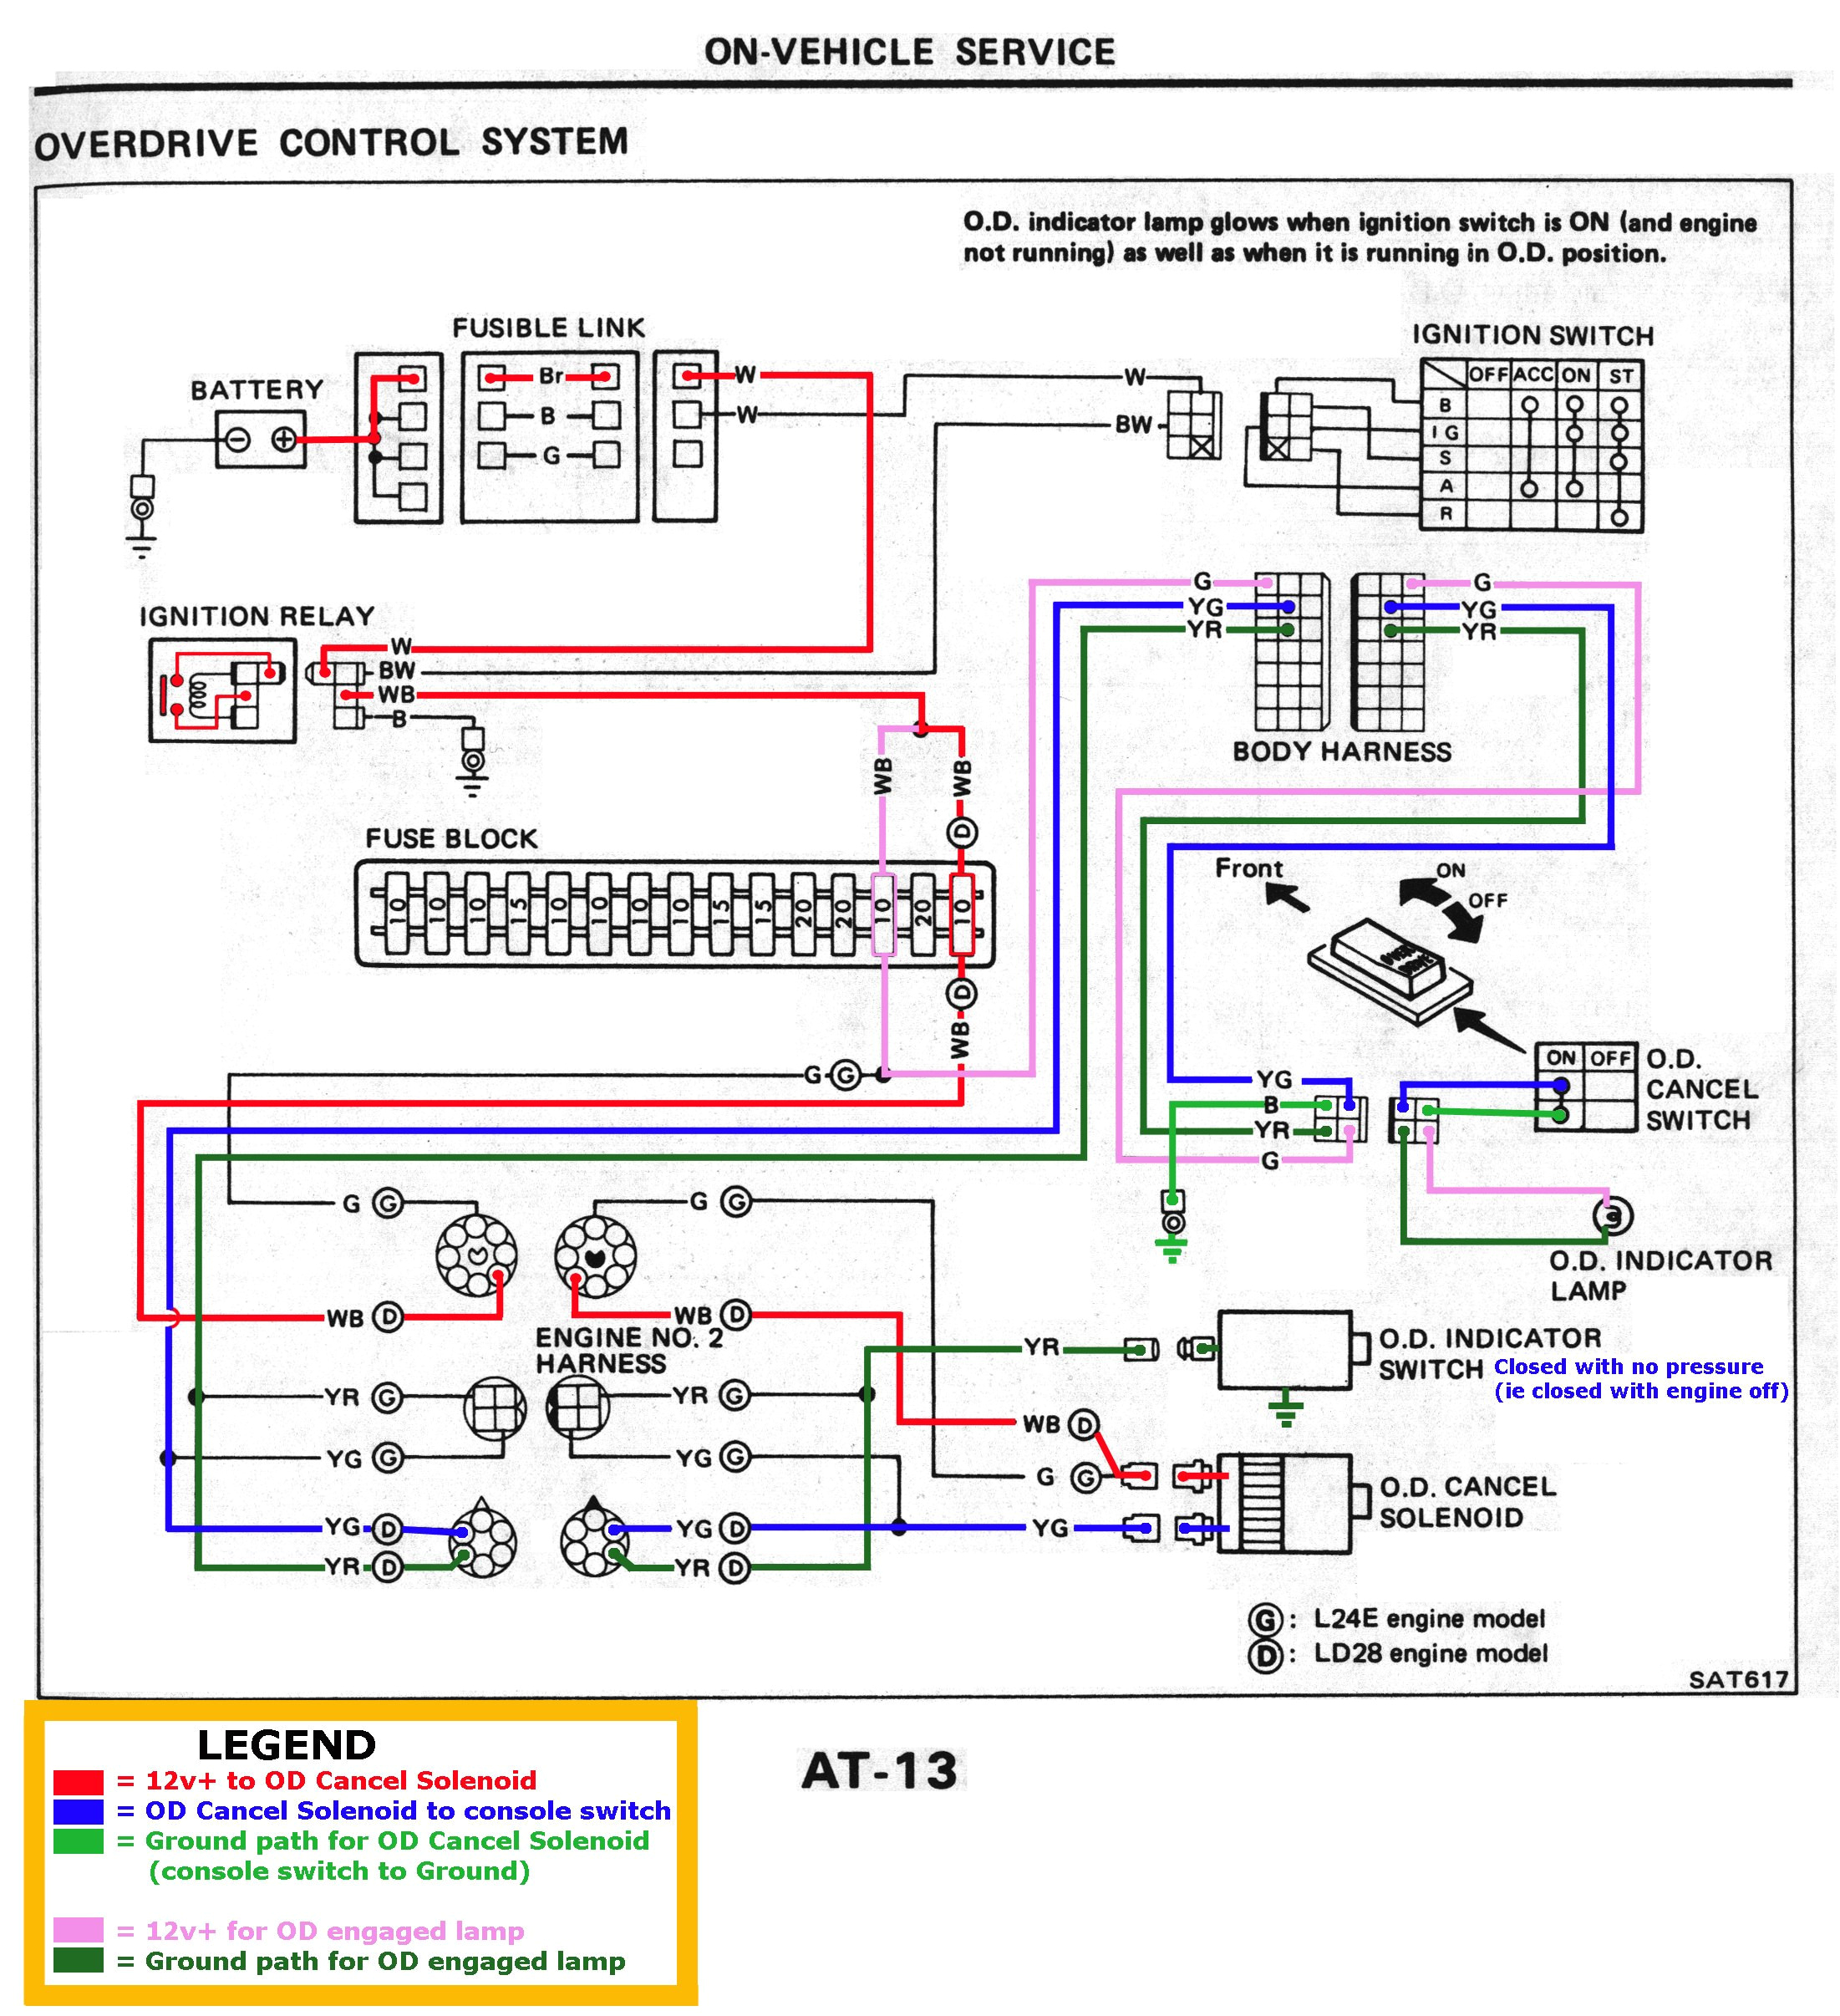 free download inf 1 2 wiring diagrams wiring diagram ame general electric motor wiring color code free download wiring